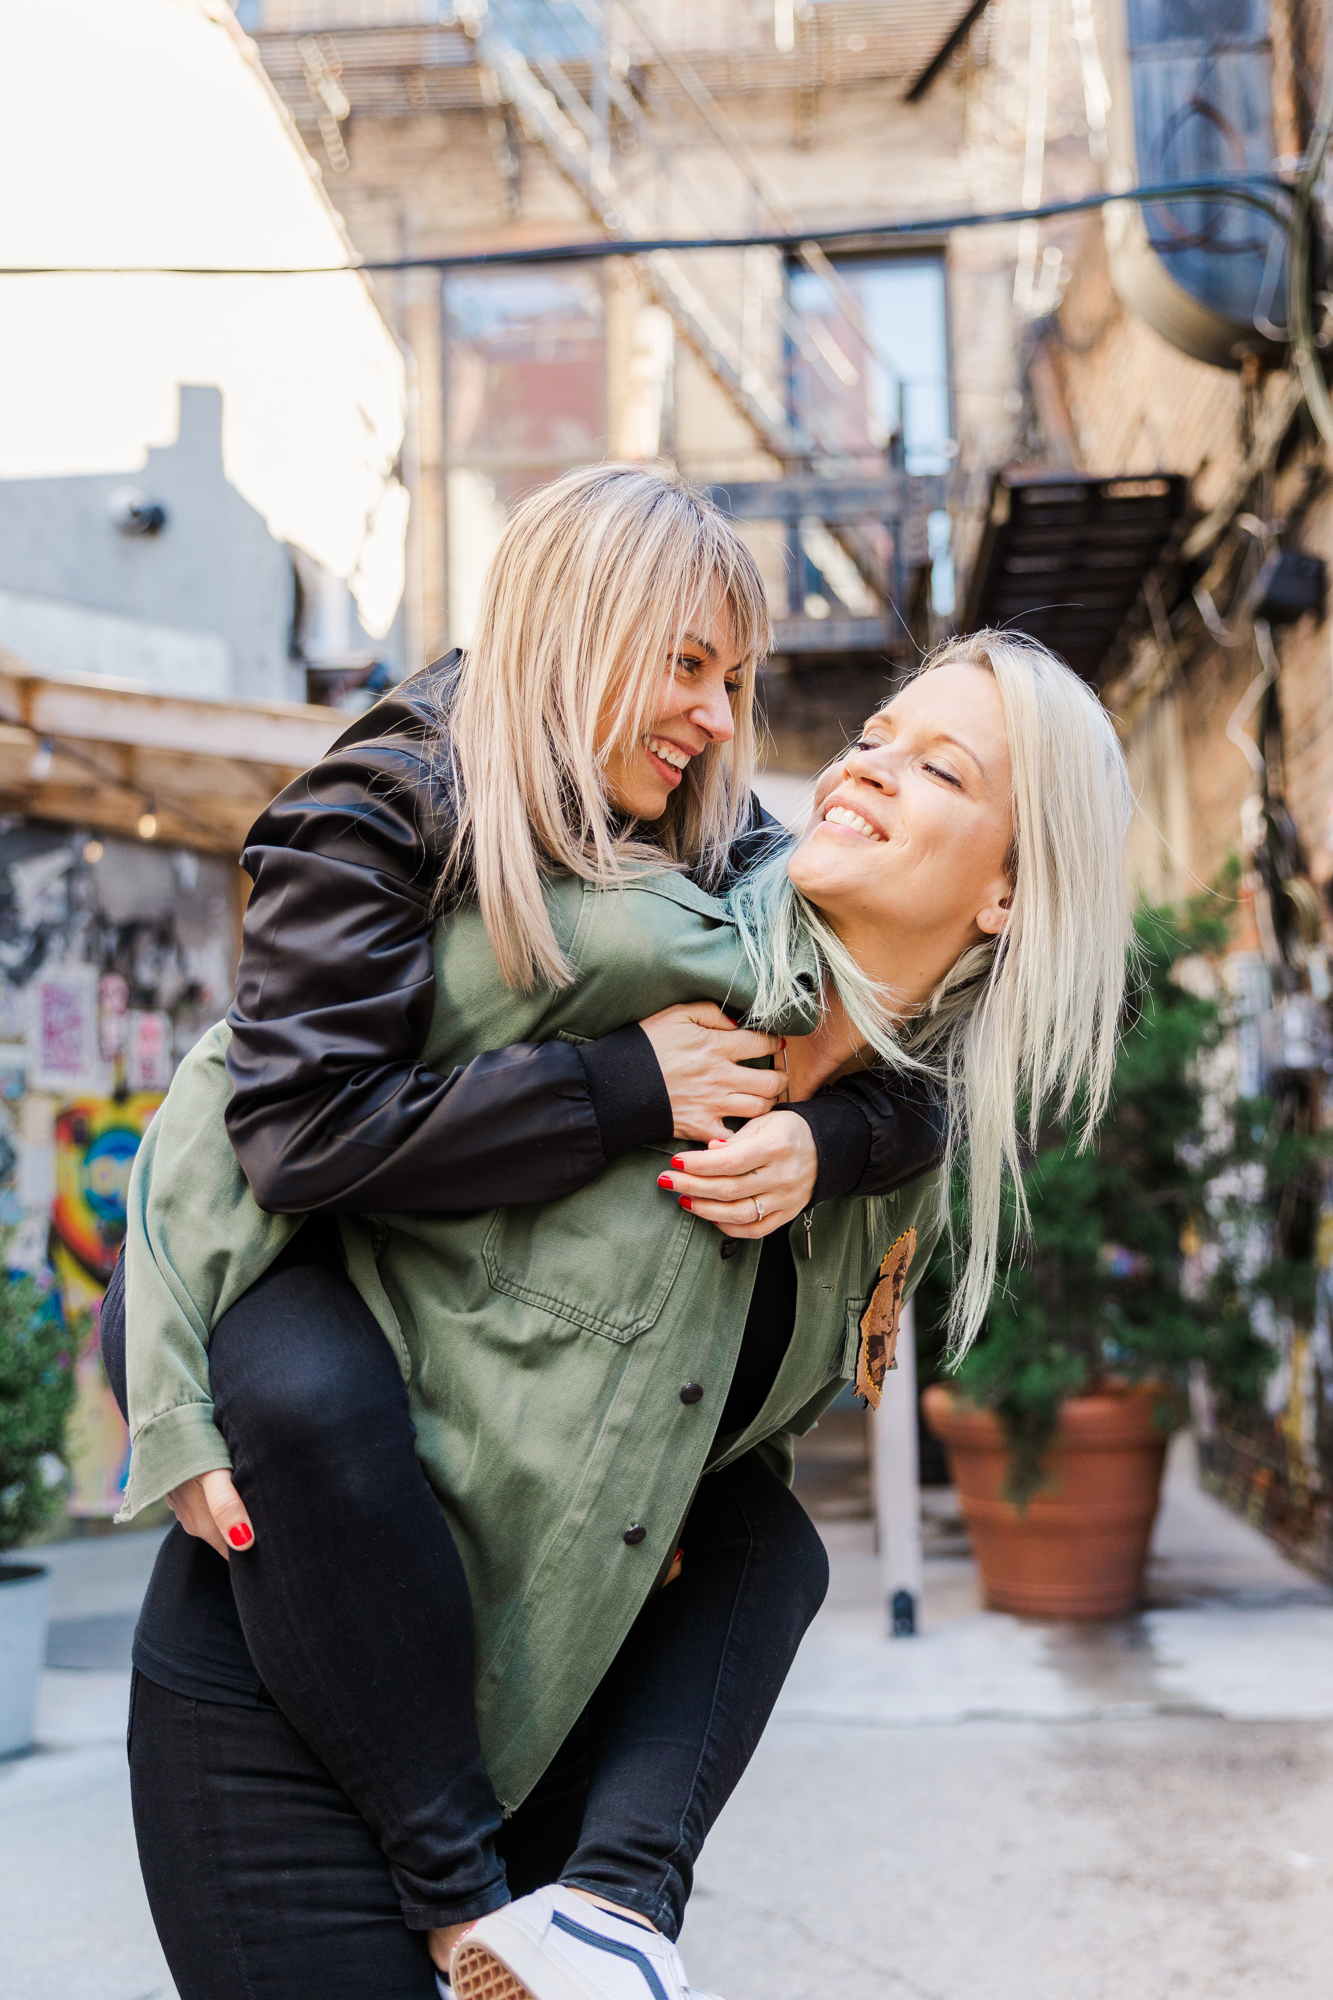 Playful LGBTQ Engagement Photo Session in SoHo